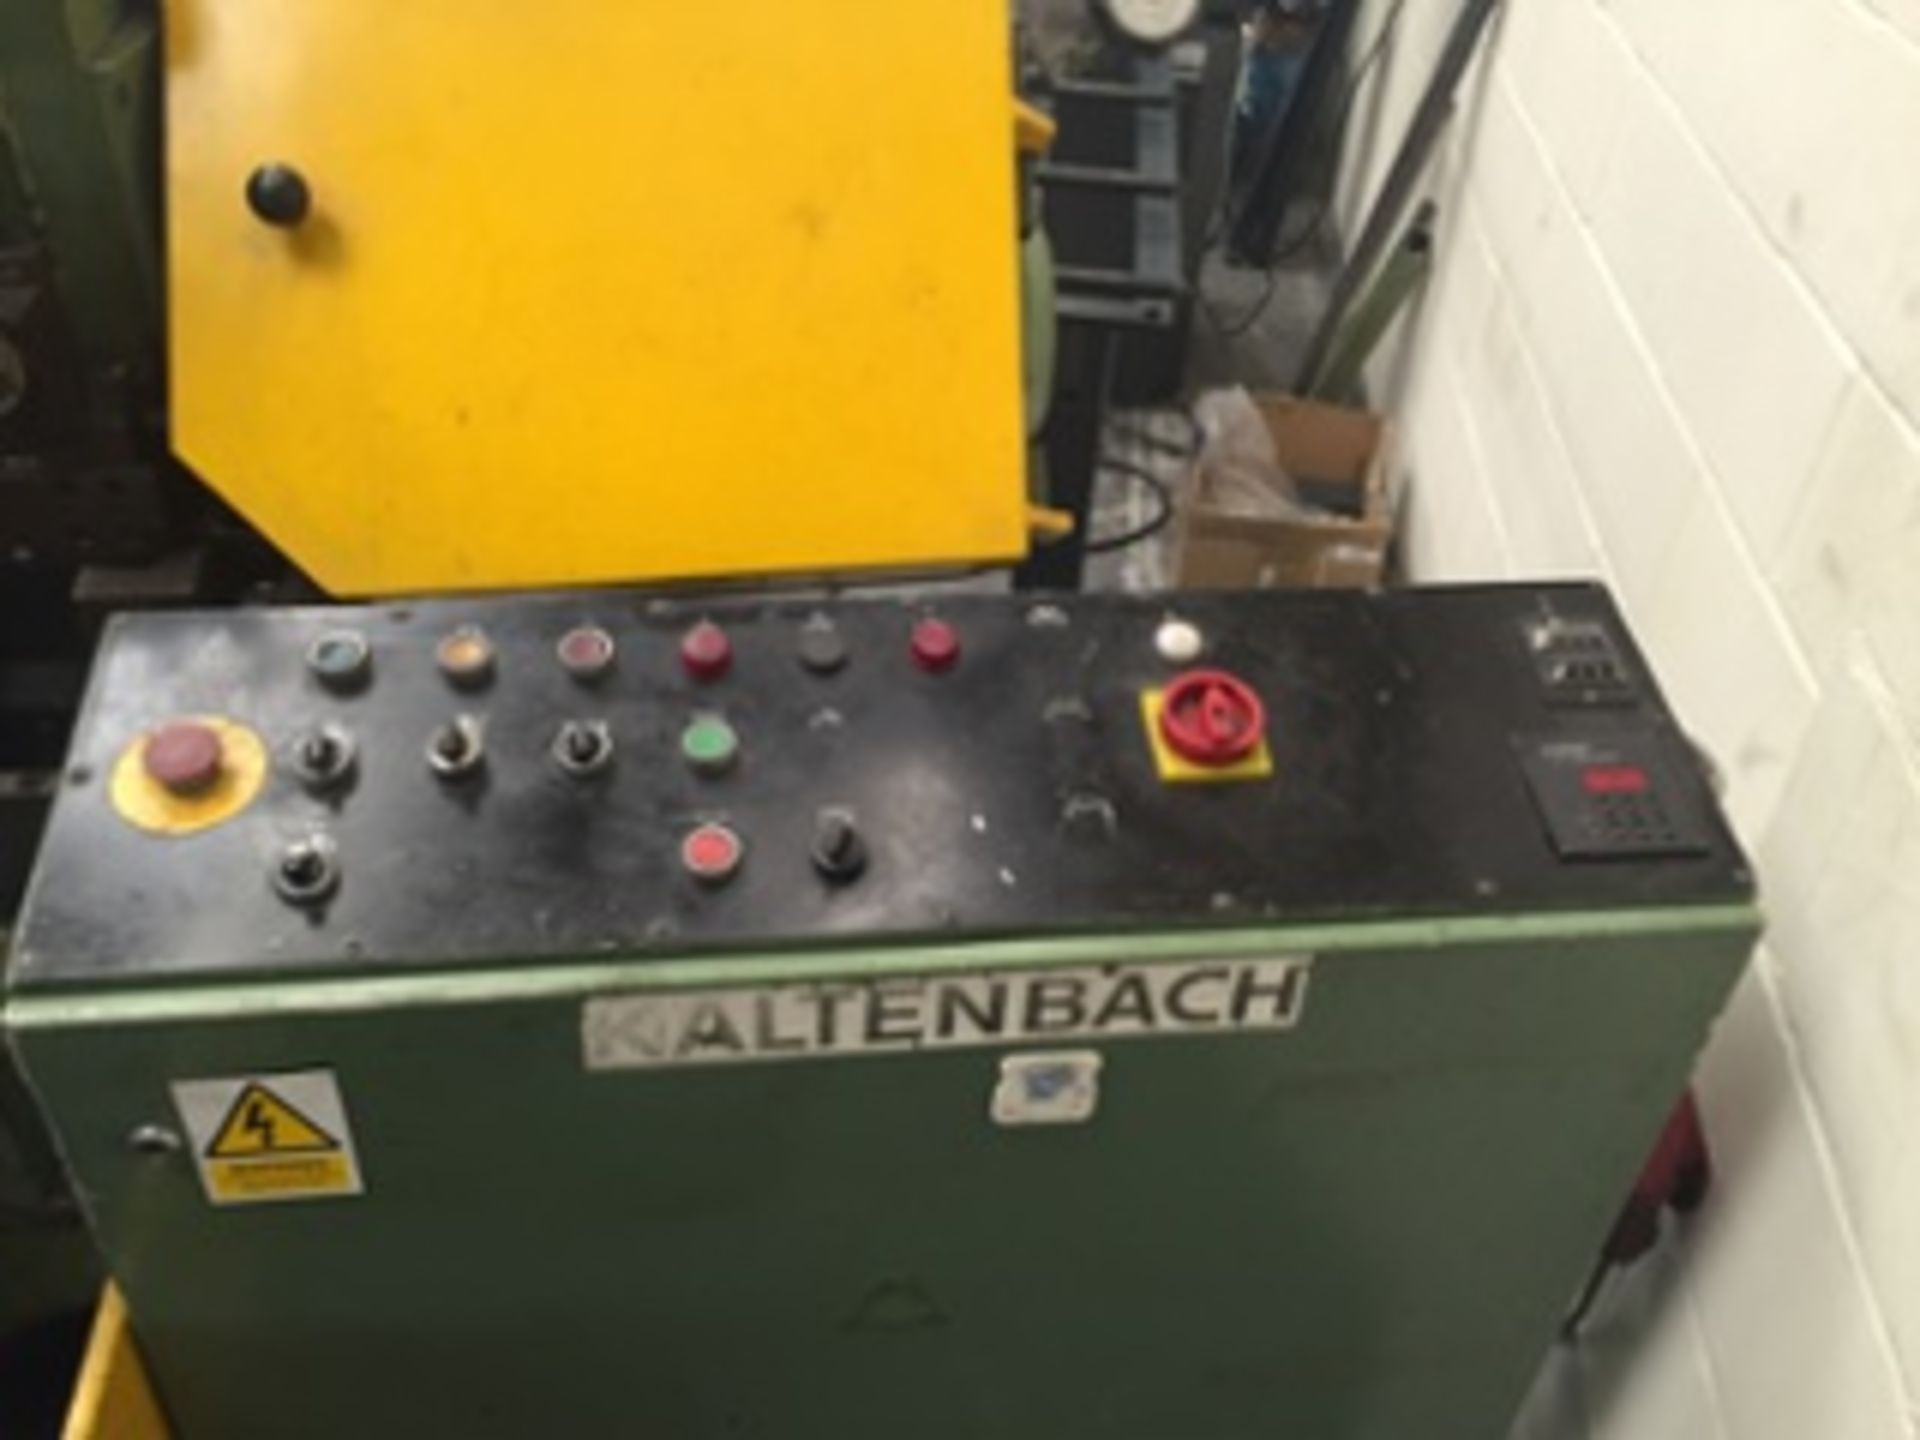 Behringer (Kaltenbach)-Fully Automatic Bandsaw - Image 2 of 3